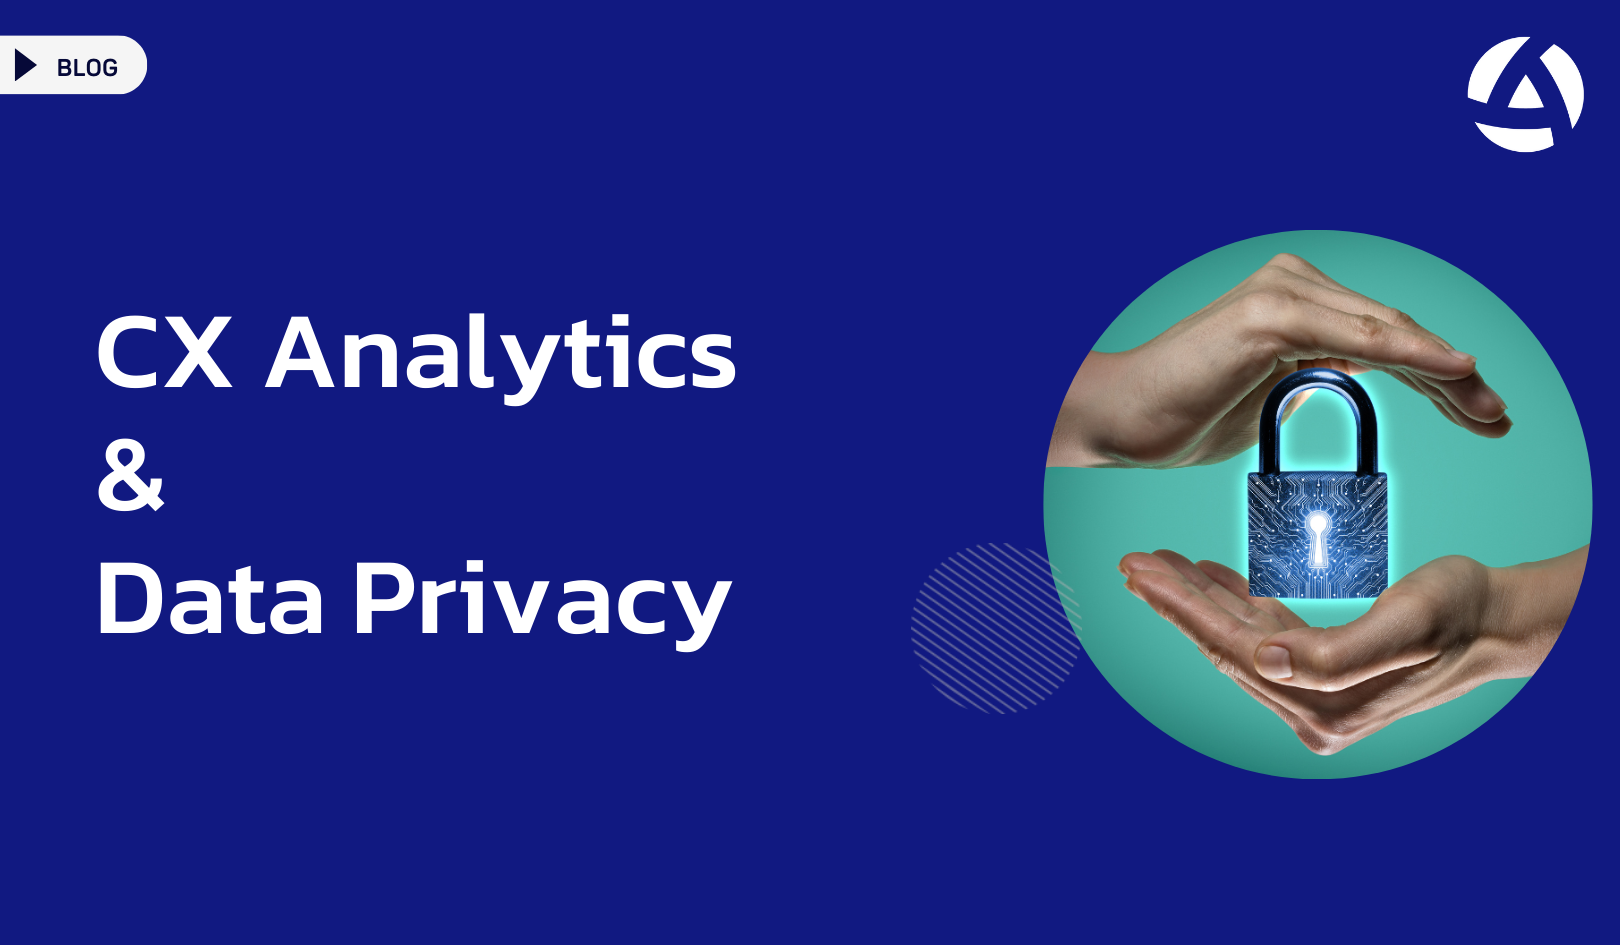 Customer Experience Analytics and Data Privacy